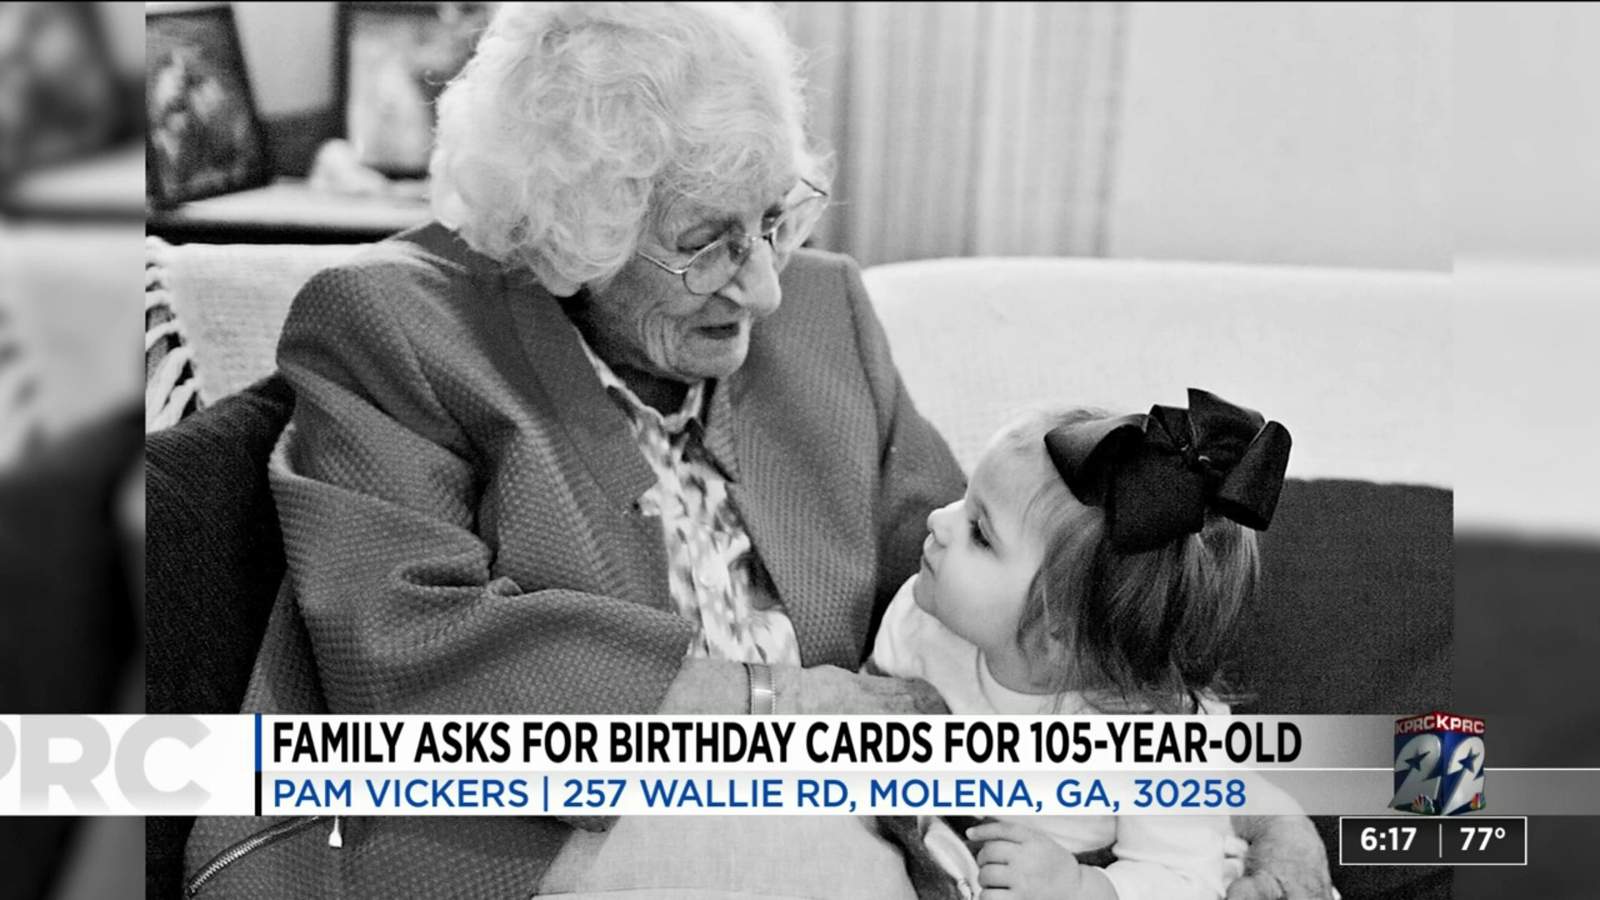 One Good Thing: Family asks for birthday cards for 105-year-old woman